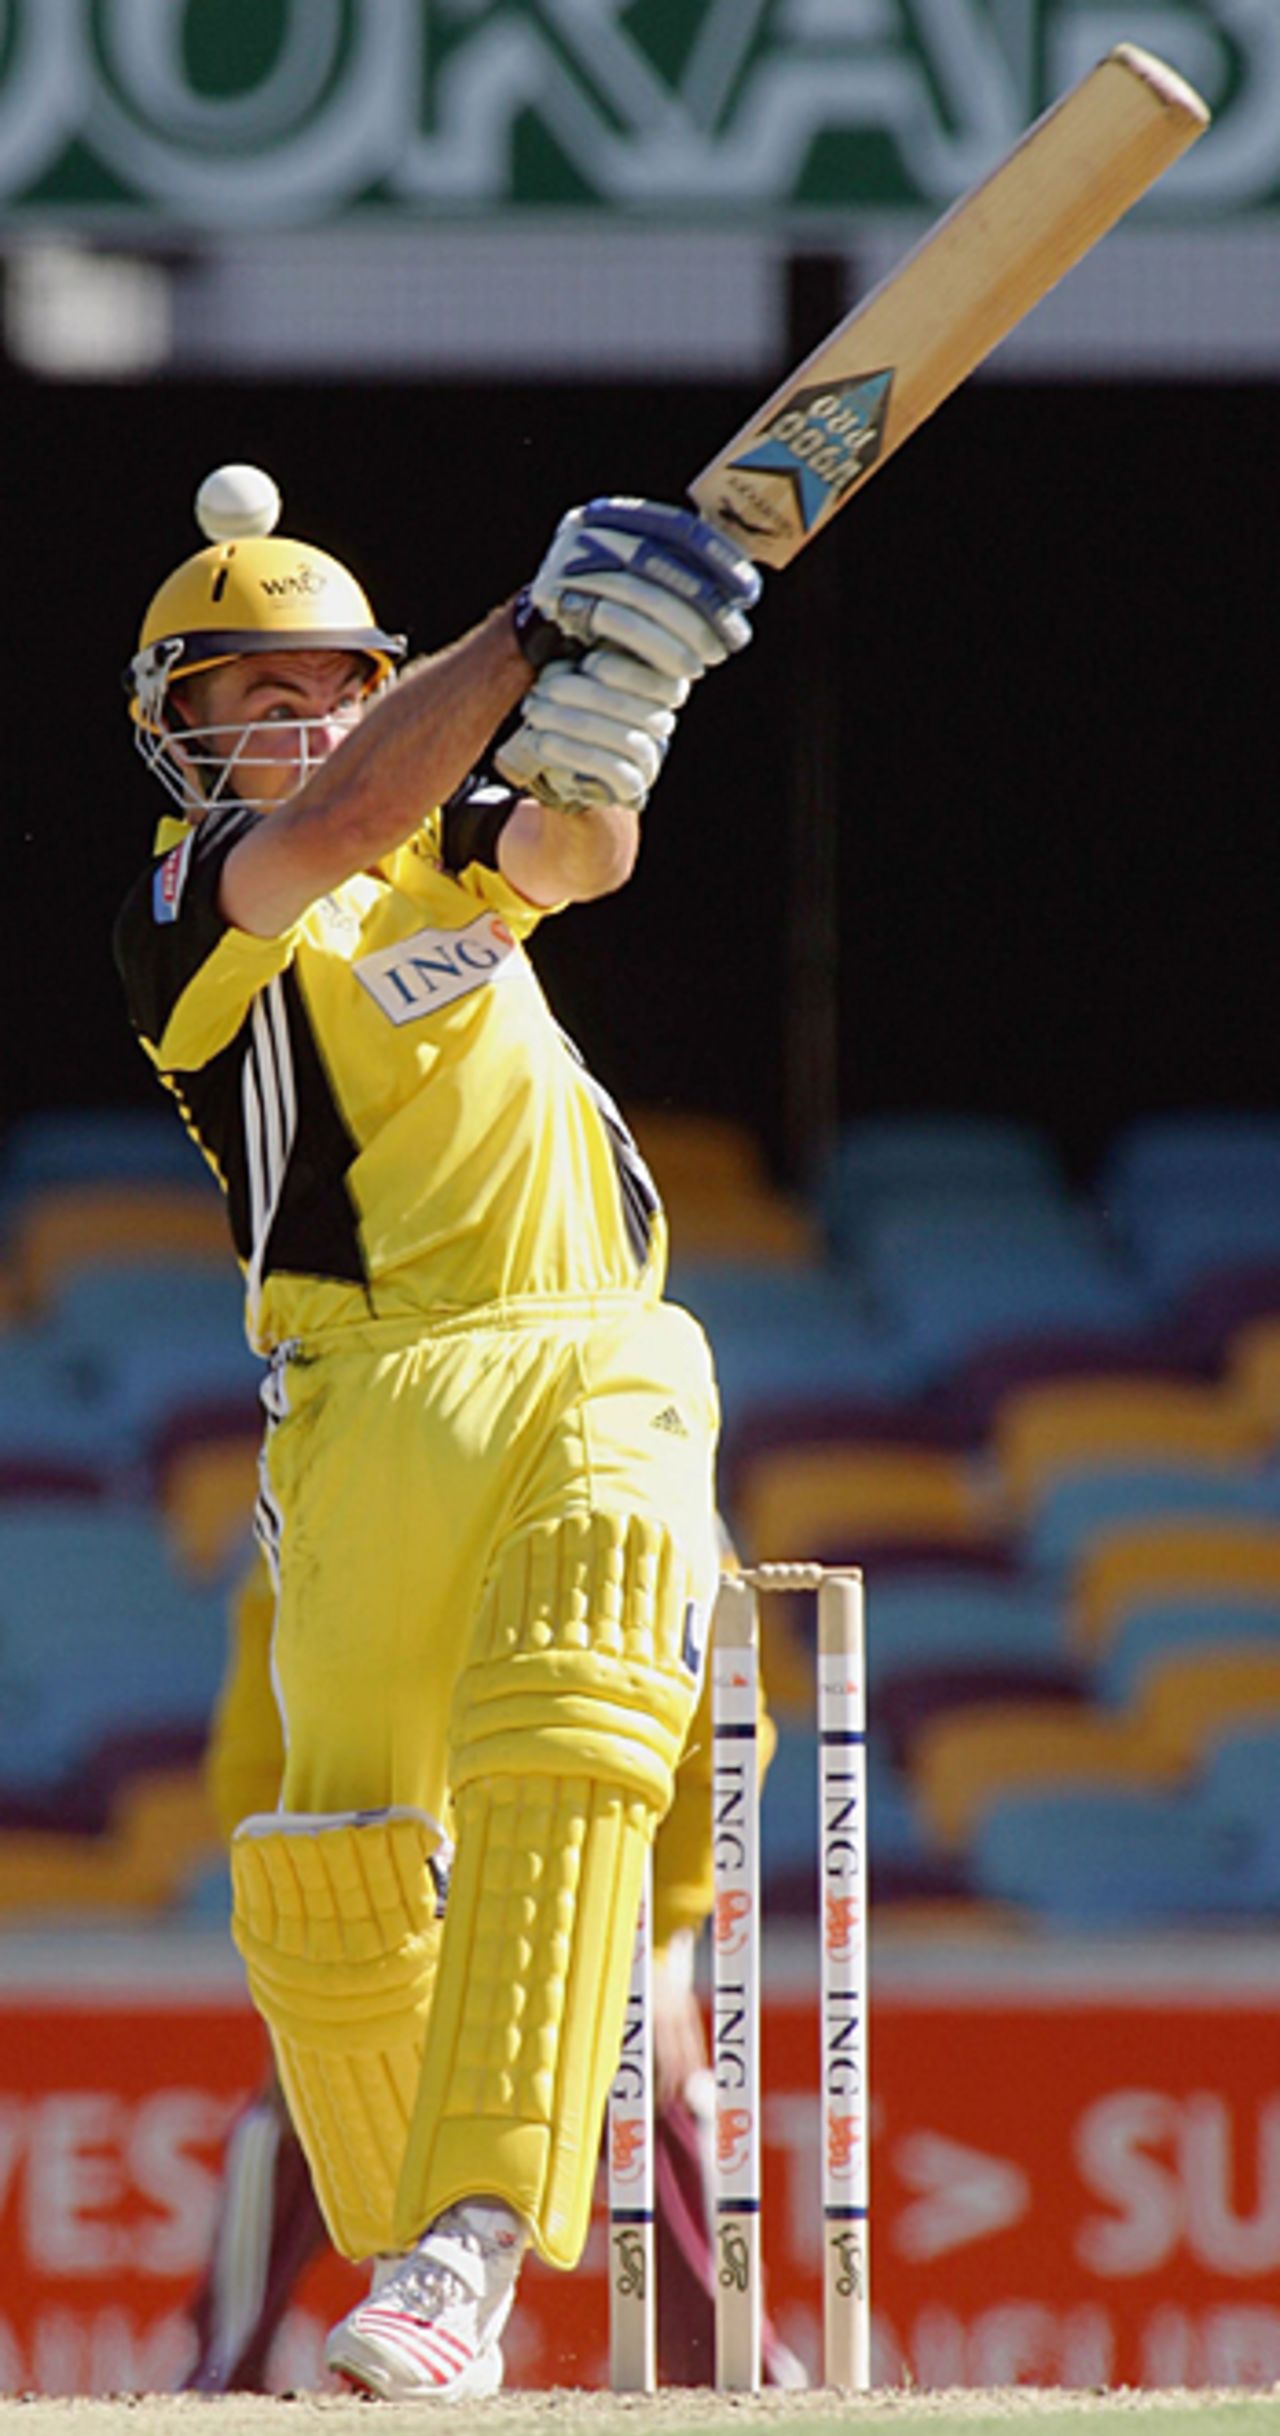 David Bandy hits out on his way to 54, Queensland v Western Australia, ING Cup, Brisbane, December 22, 2005